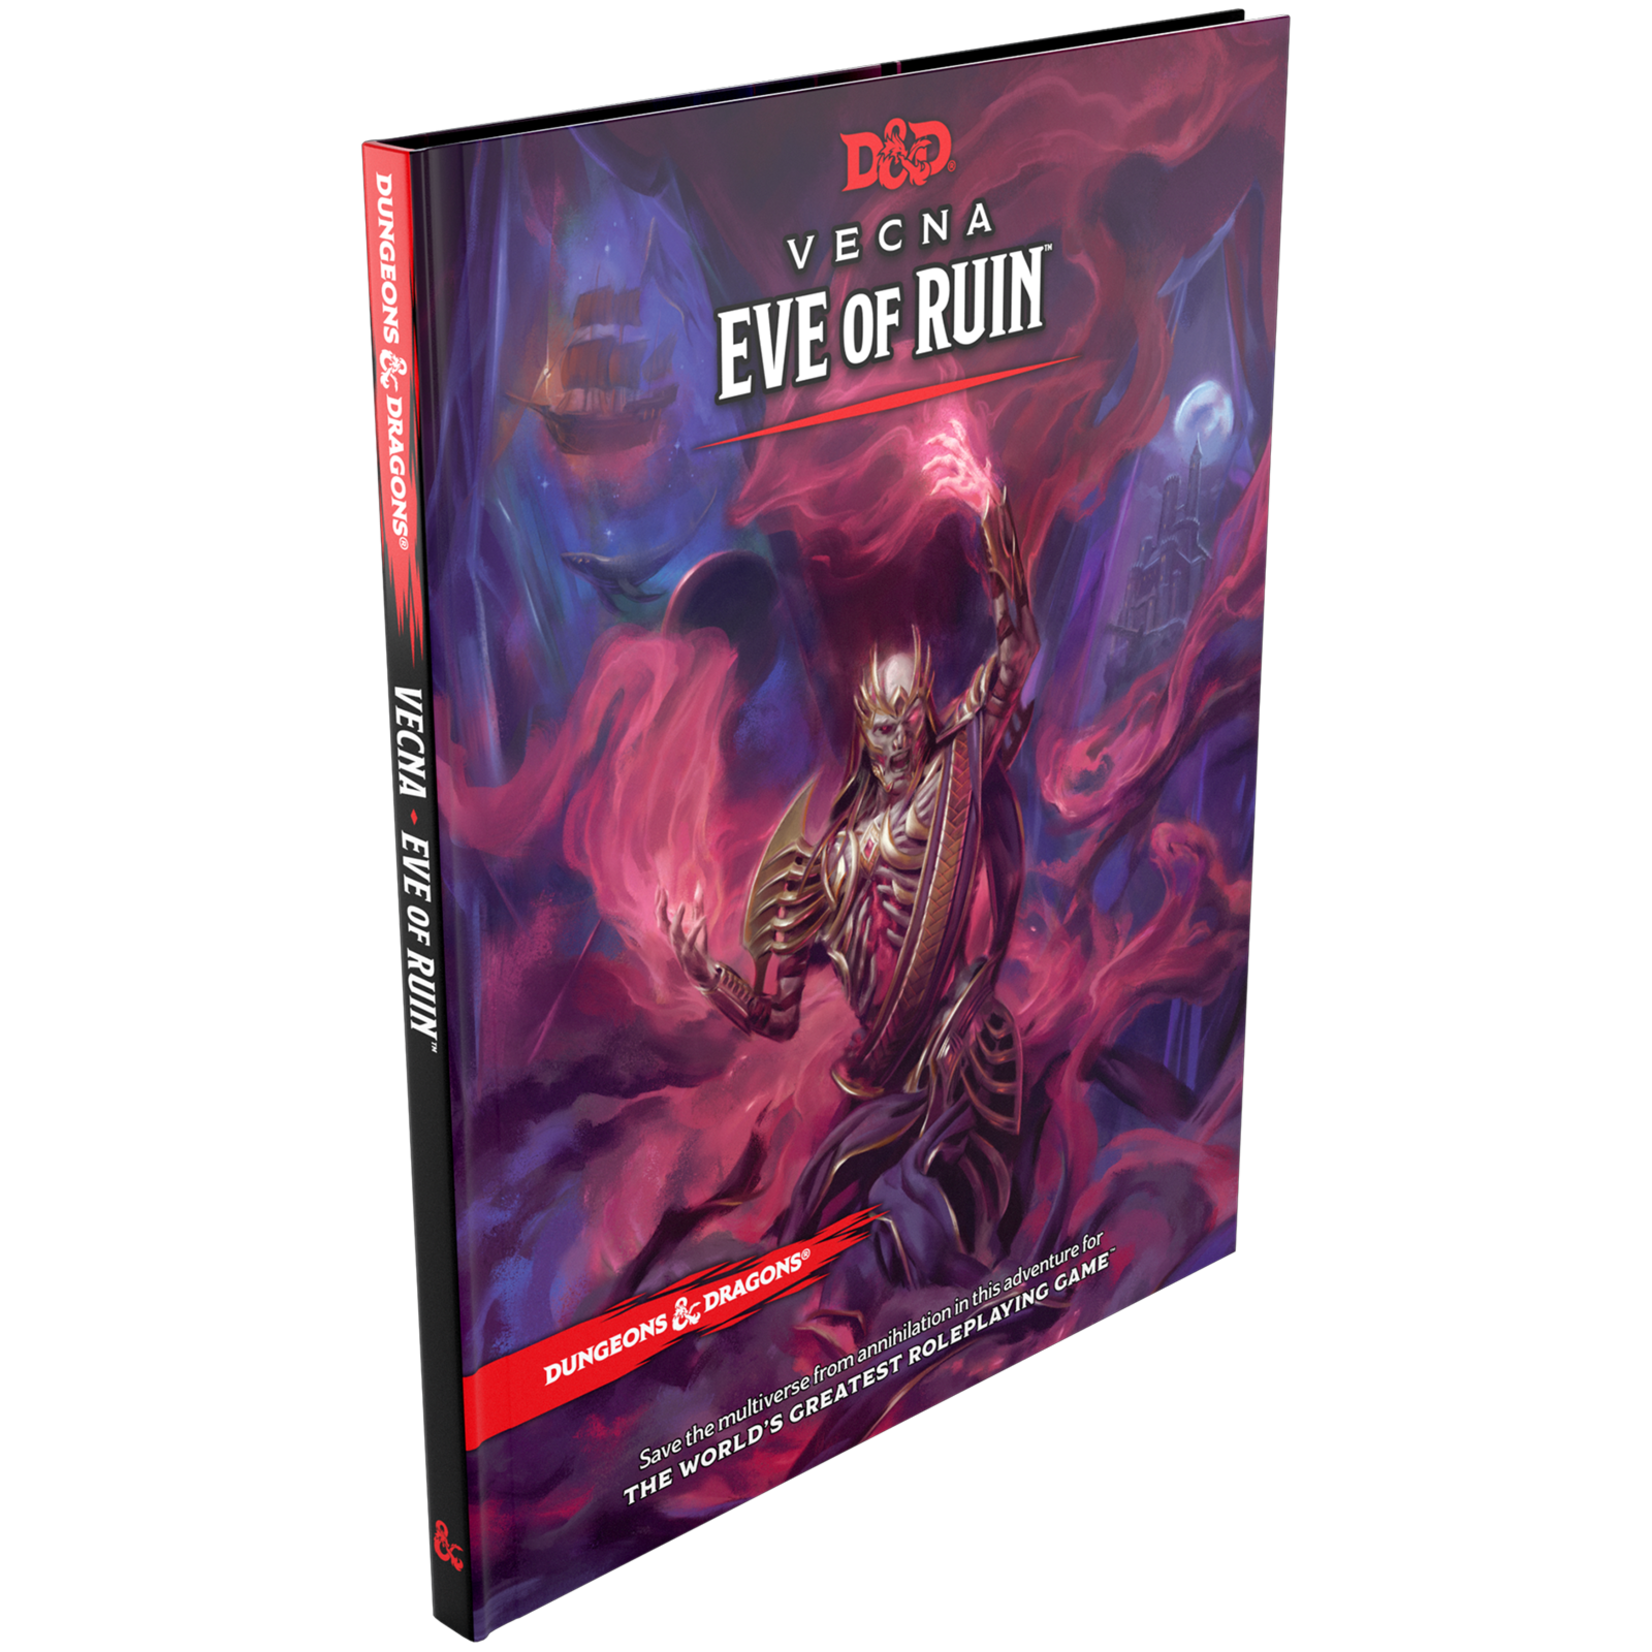 Wizards of the Coast Dungeons & Dragons: Vecna - Eve of Ruin Hardcover (Preorder)